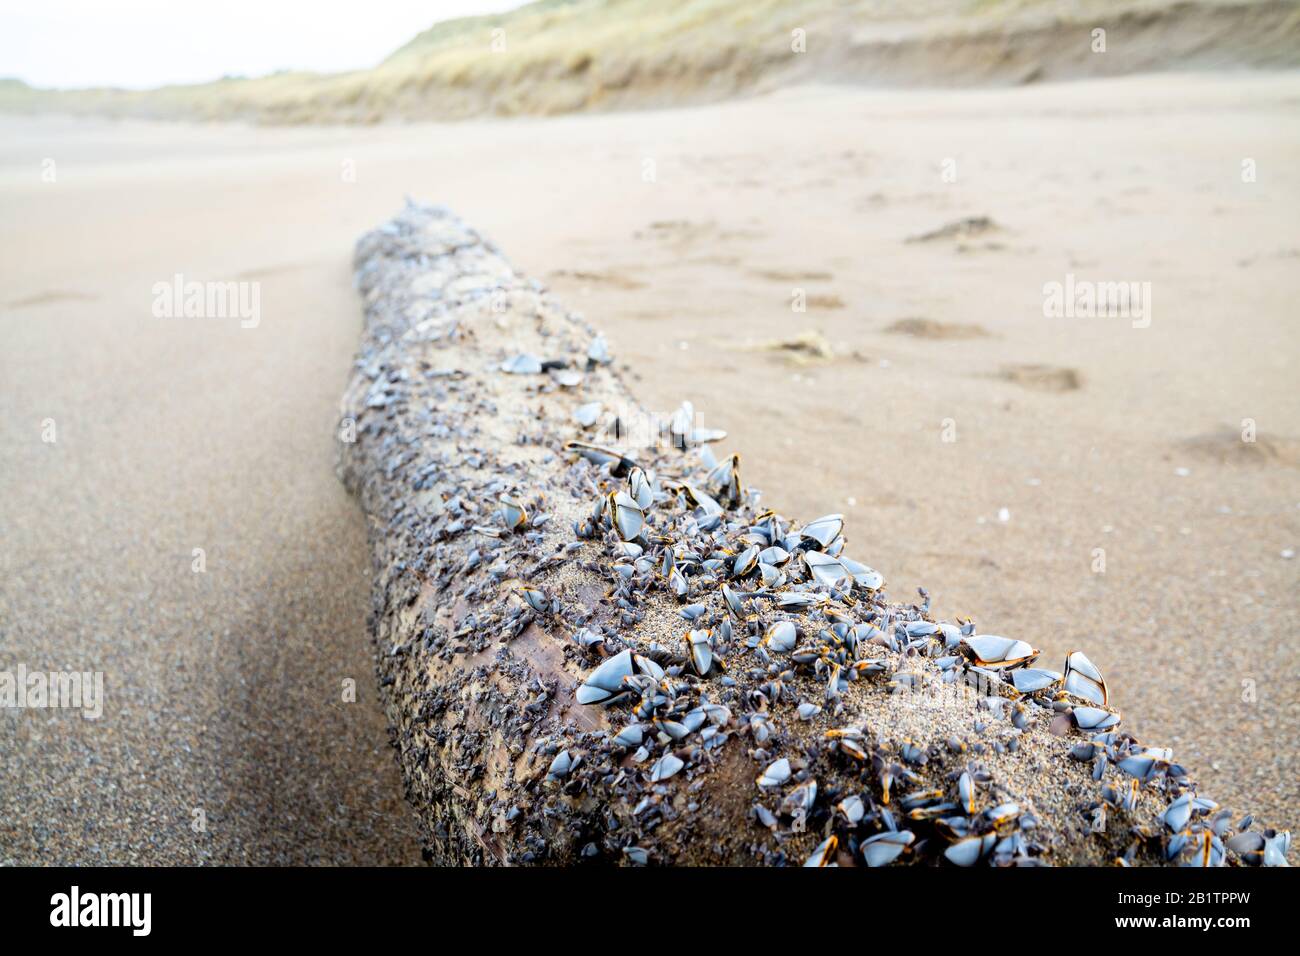 Mussels on driftwood at Atlantic beach in the winter. Stock Photo